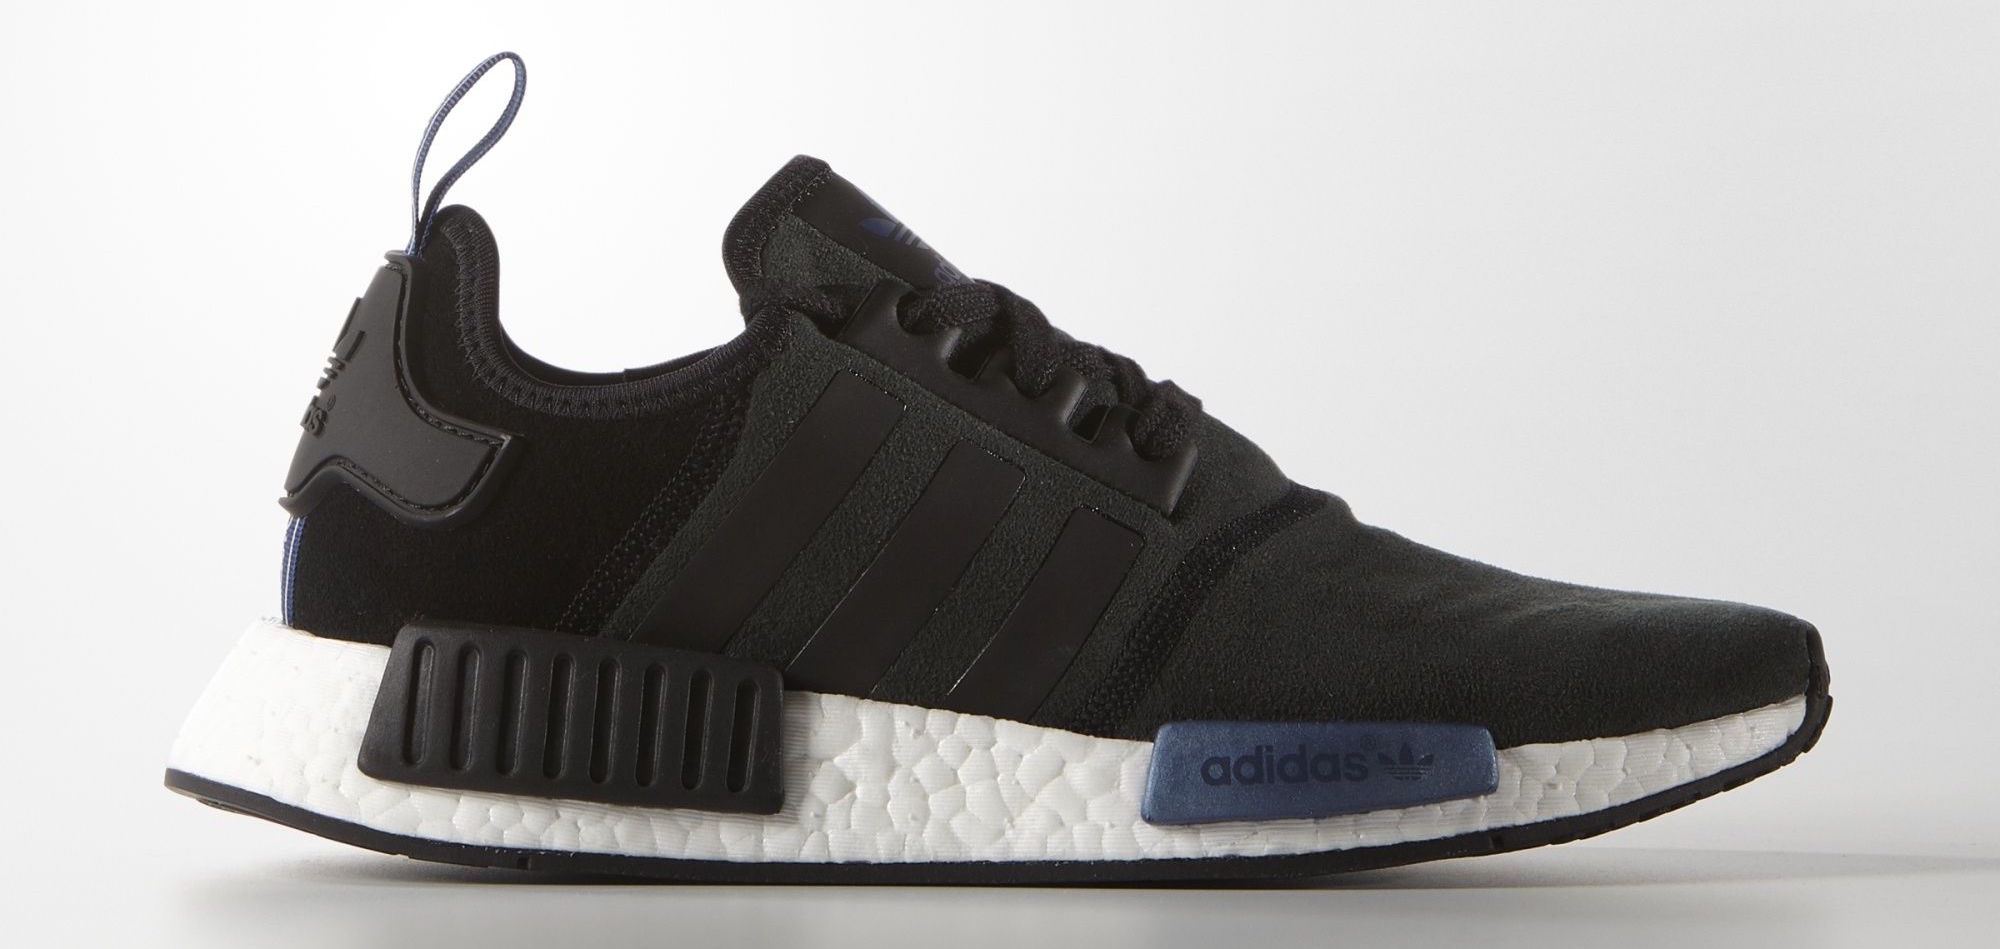 The adidas NMD R1 Runner is Available 